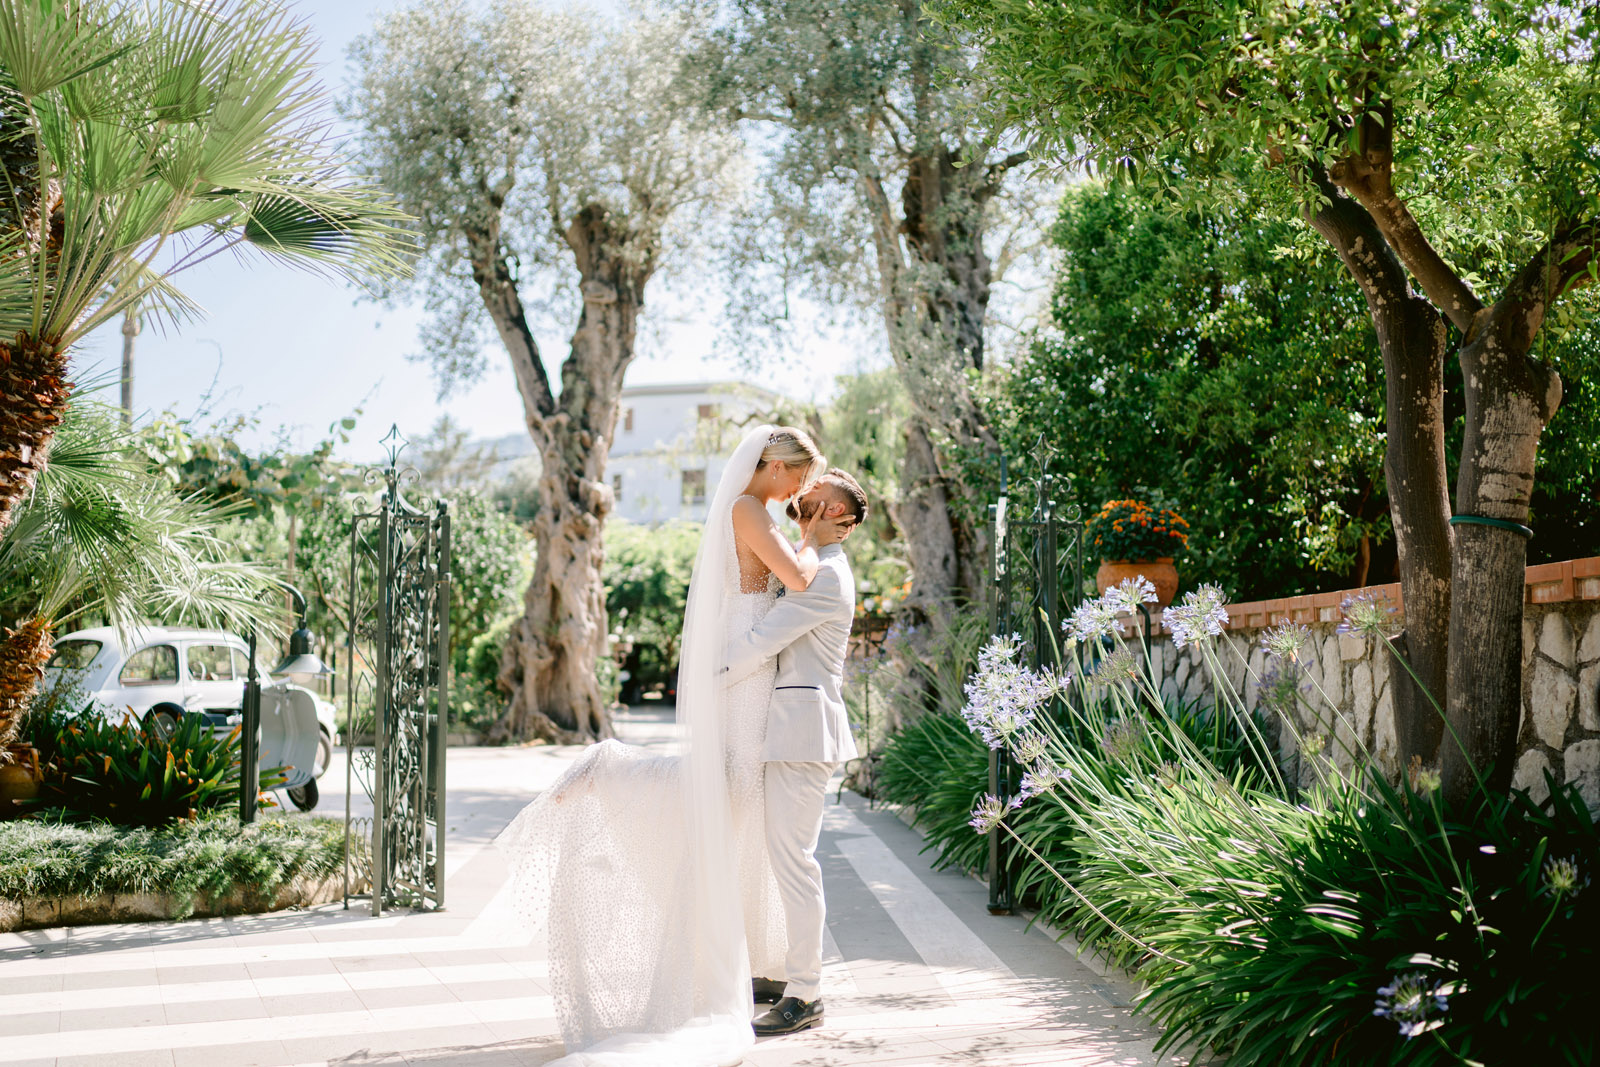 bride and groom at villa antiche mura on their wedding day kissing in the gardens and bride is lifted in the air